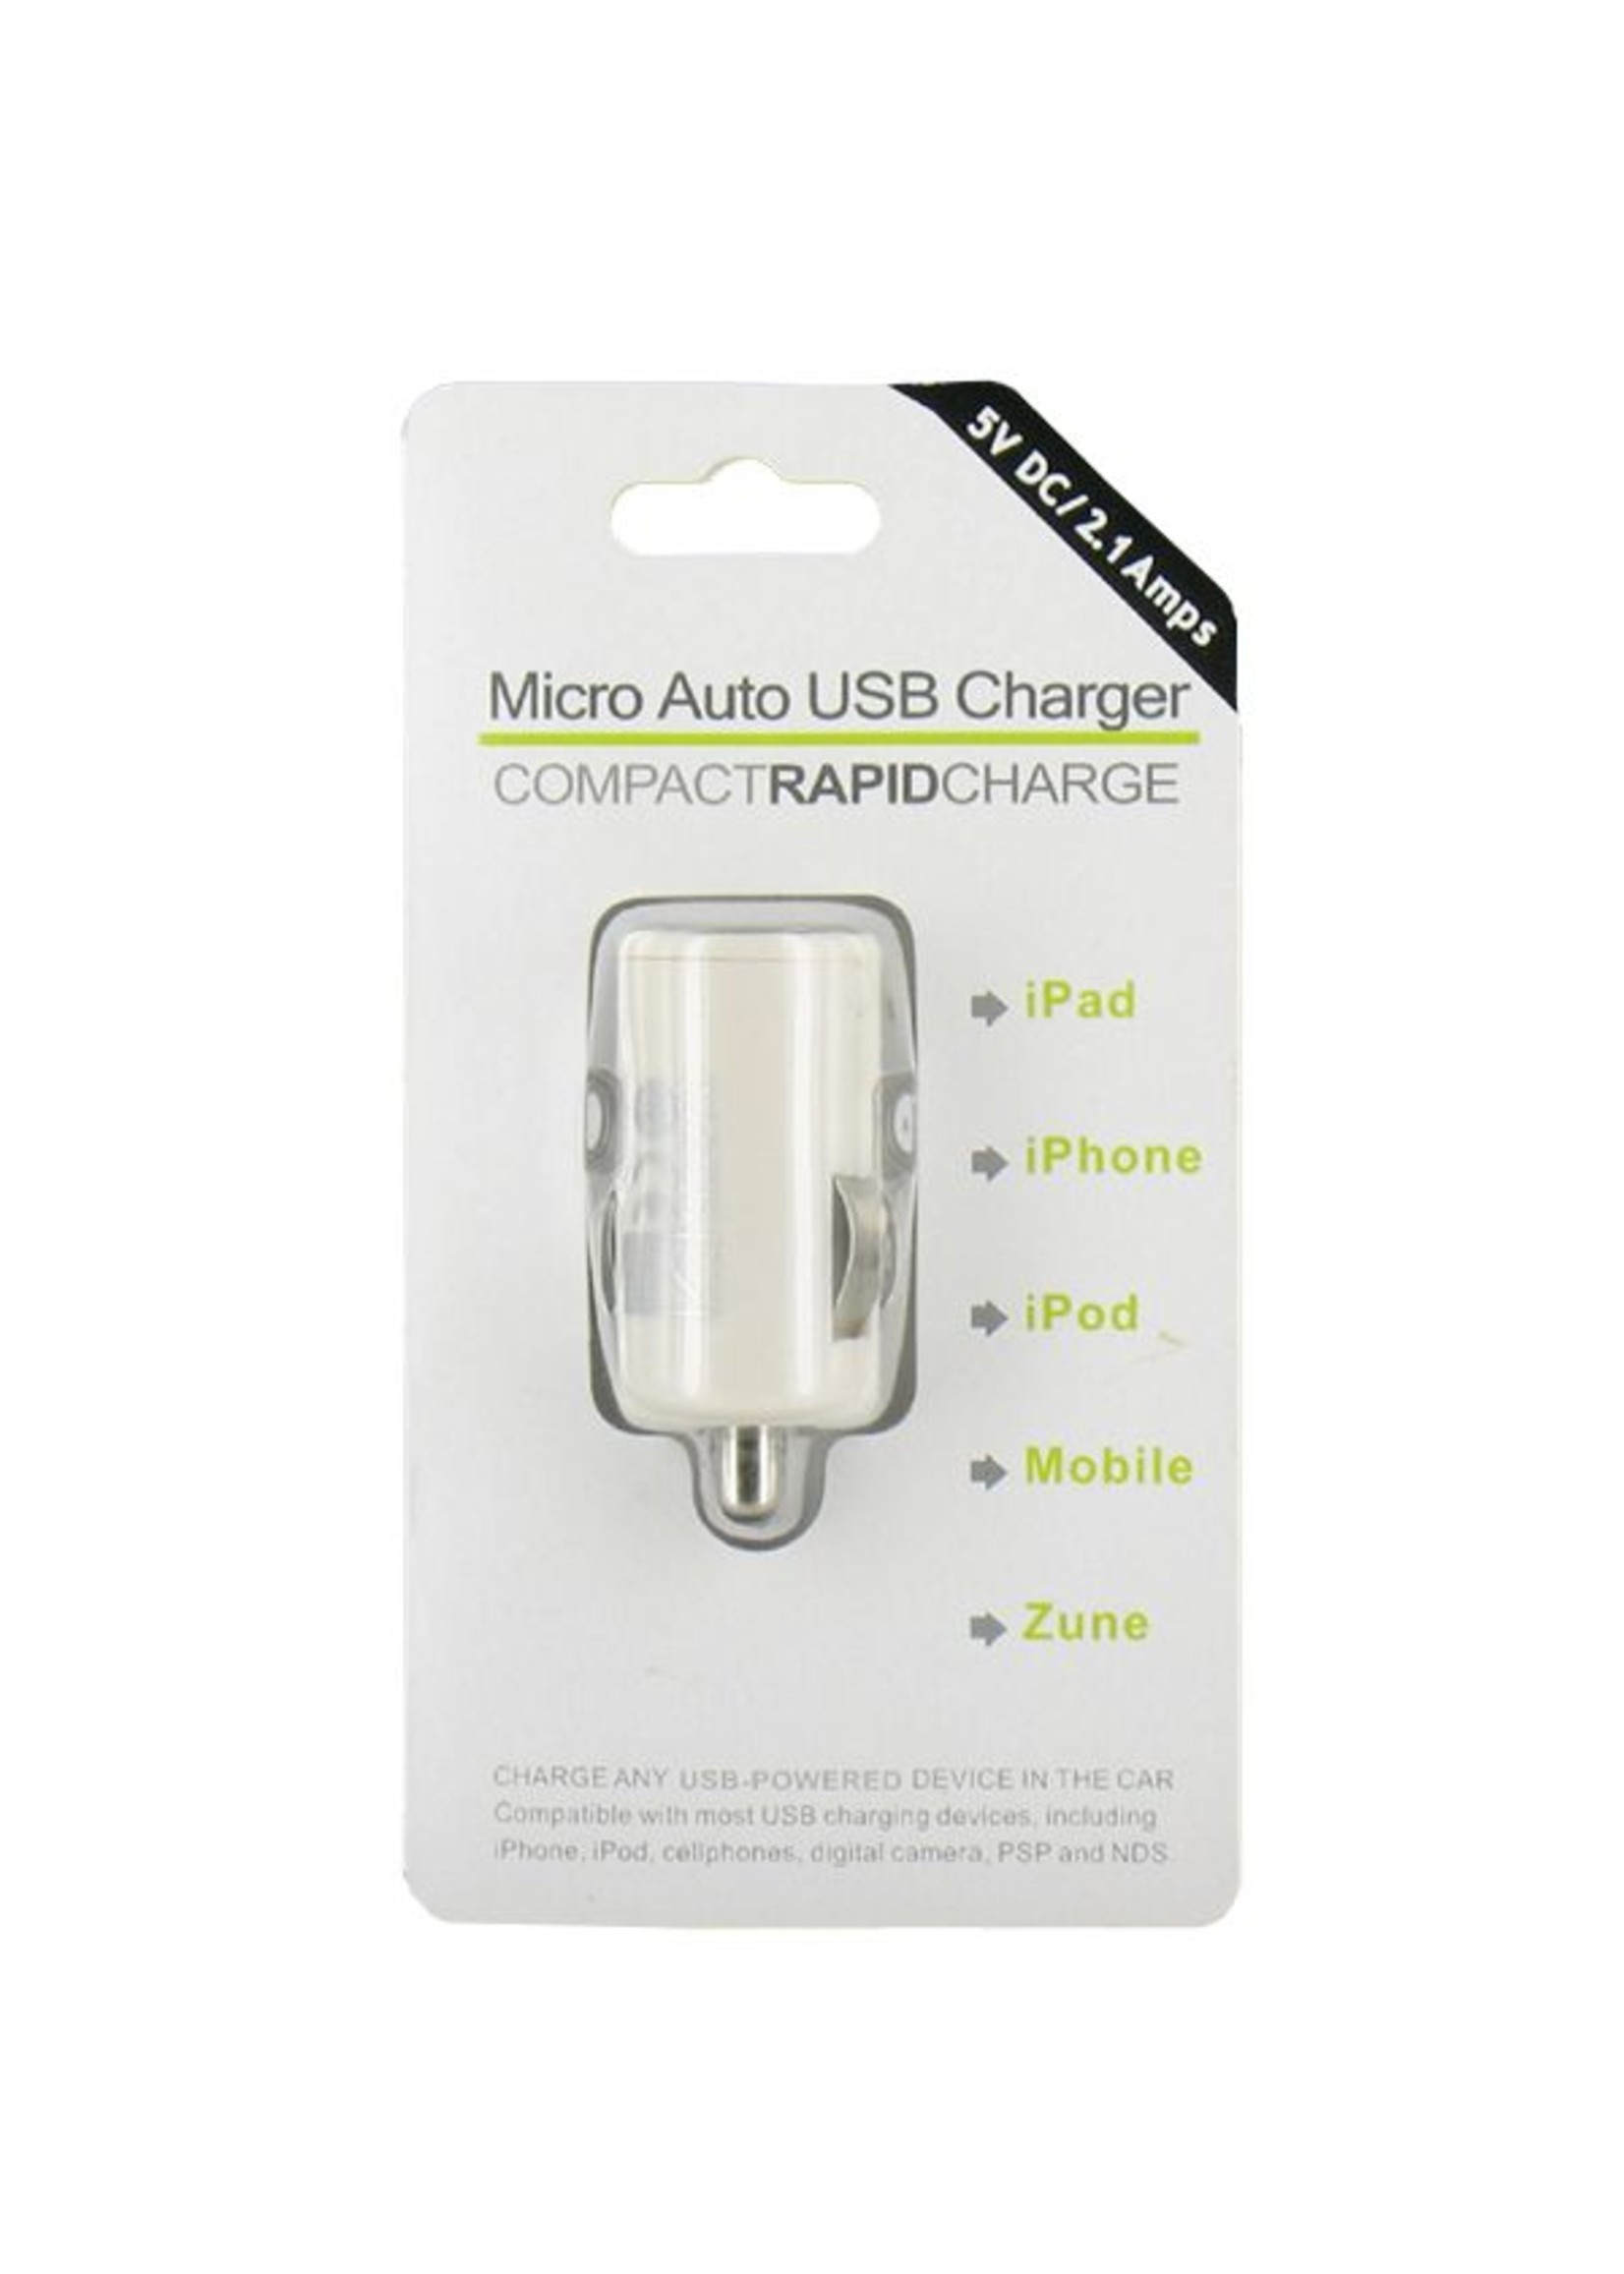 Car USB Charger 2.1 Ampère for Tablet and Smartphone